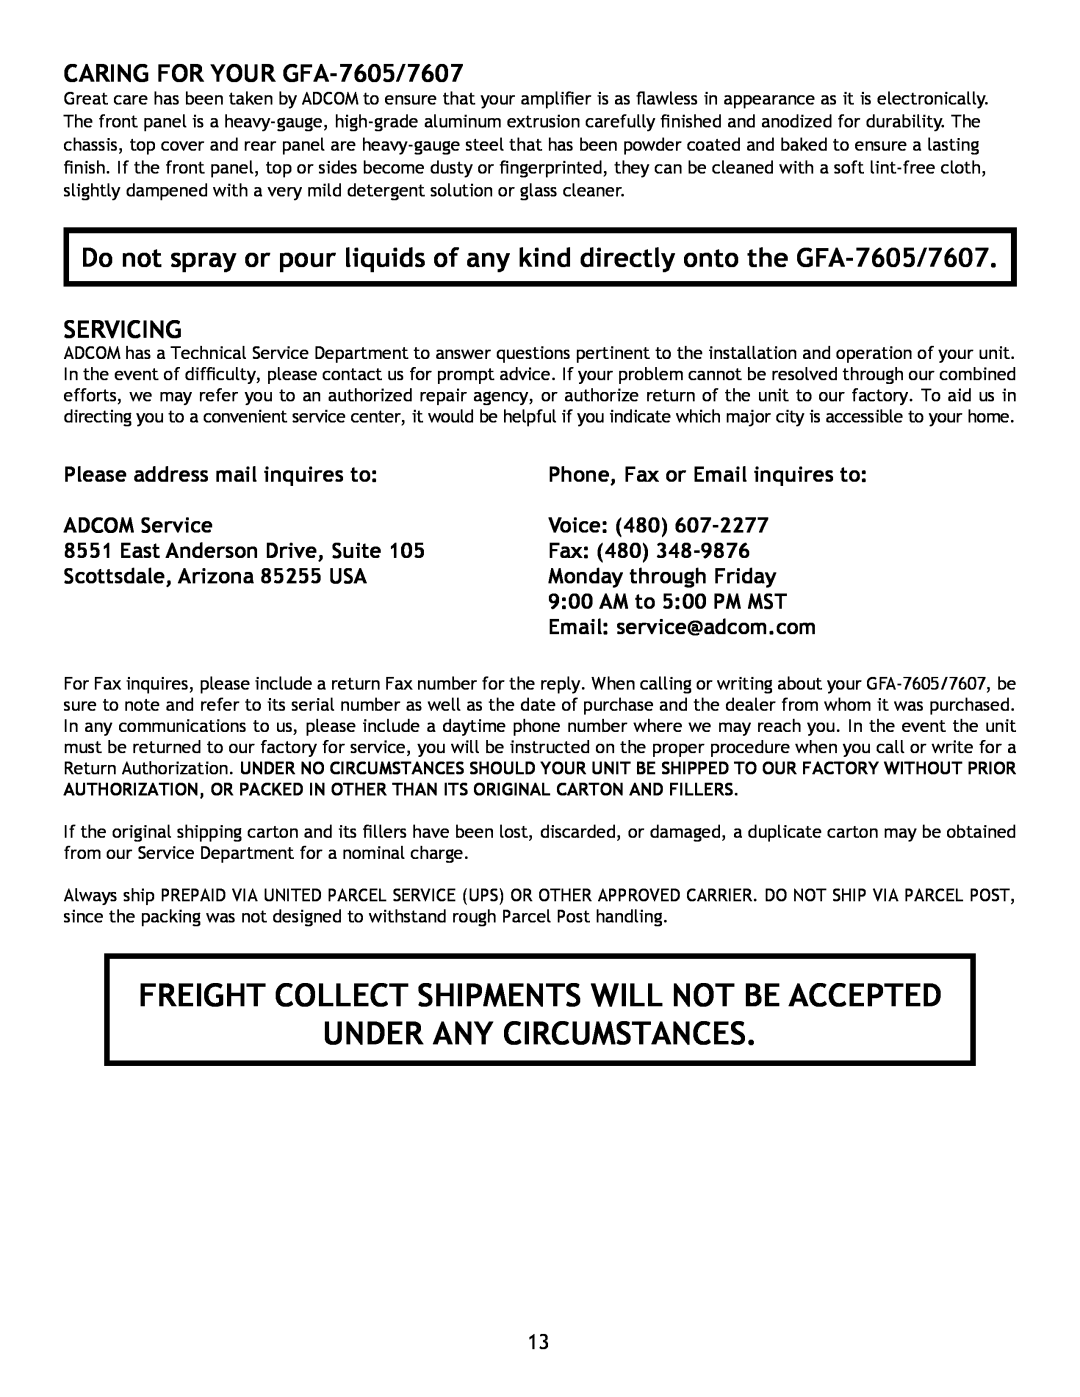 Adcom GFA-7607 Freight Collect Shipments Will Not Be Accepted, Under Any Circumstances, CARING FOR YOUR GFA-7605/7607, Fax 